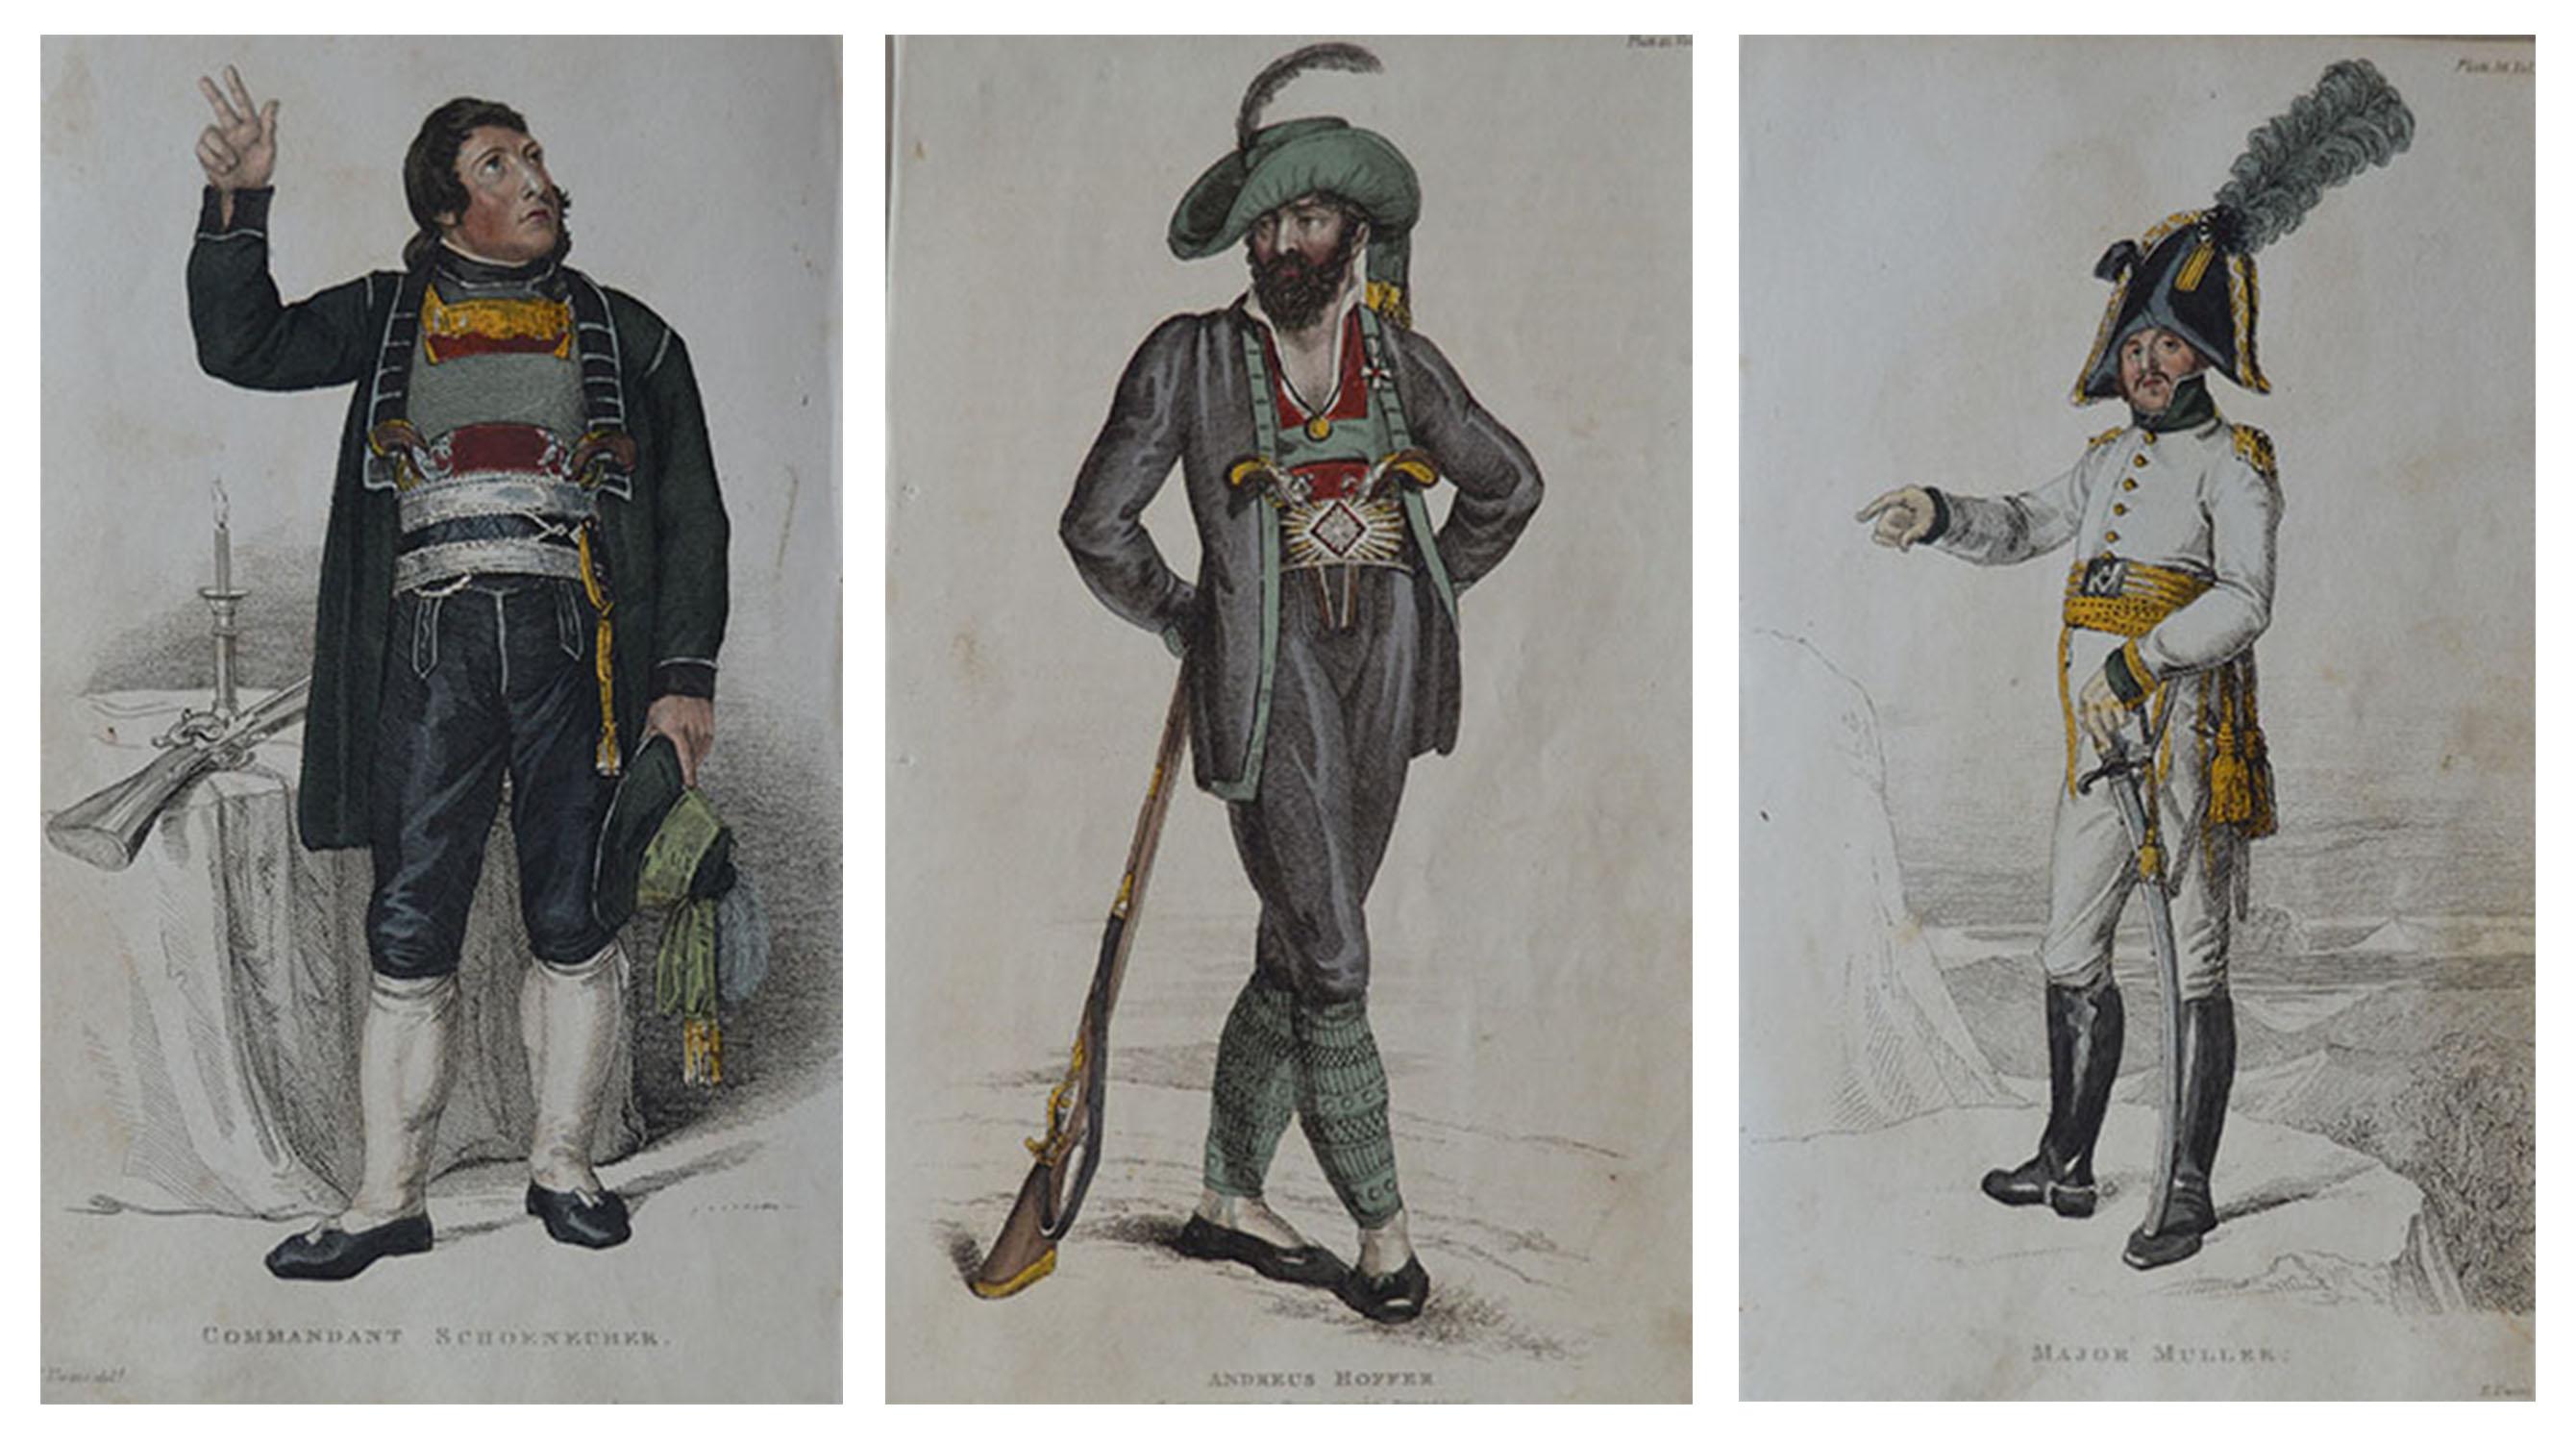 Fabulous group of 3 military prints

We have commander Schoenecher, Andreus Hoffer and Major Muller

Copper-plate engravings with original hand color.

Published by Ackermann, 1809.

Unframed.

The measurement given below is for one